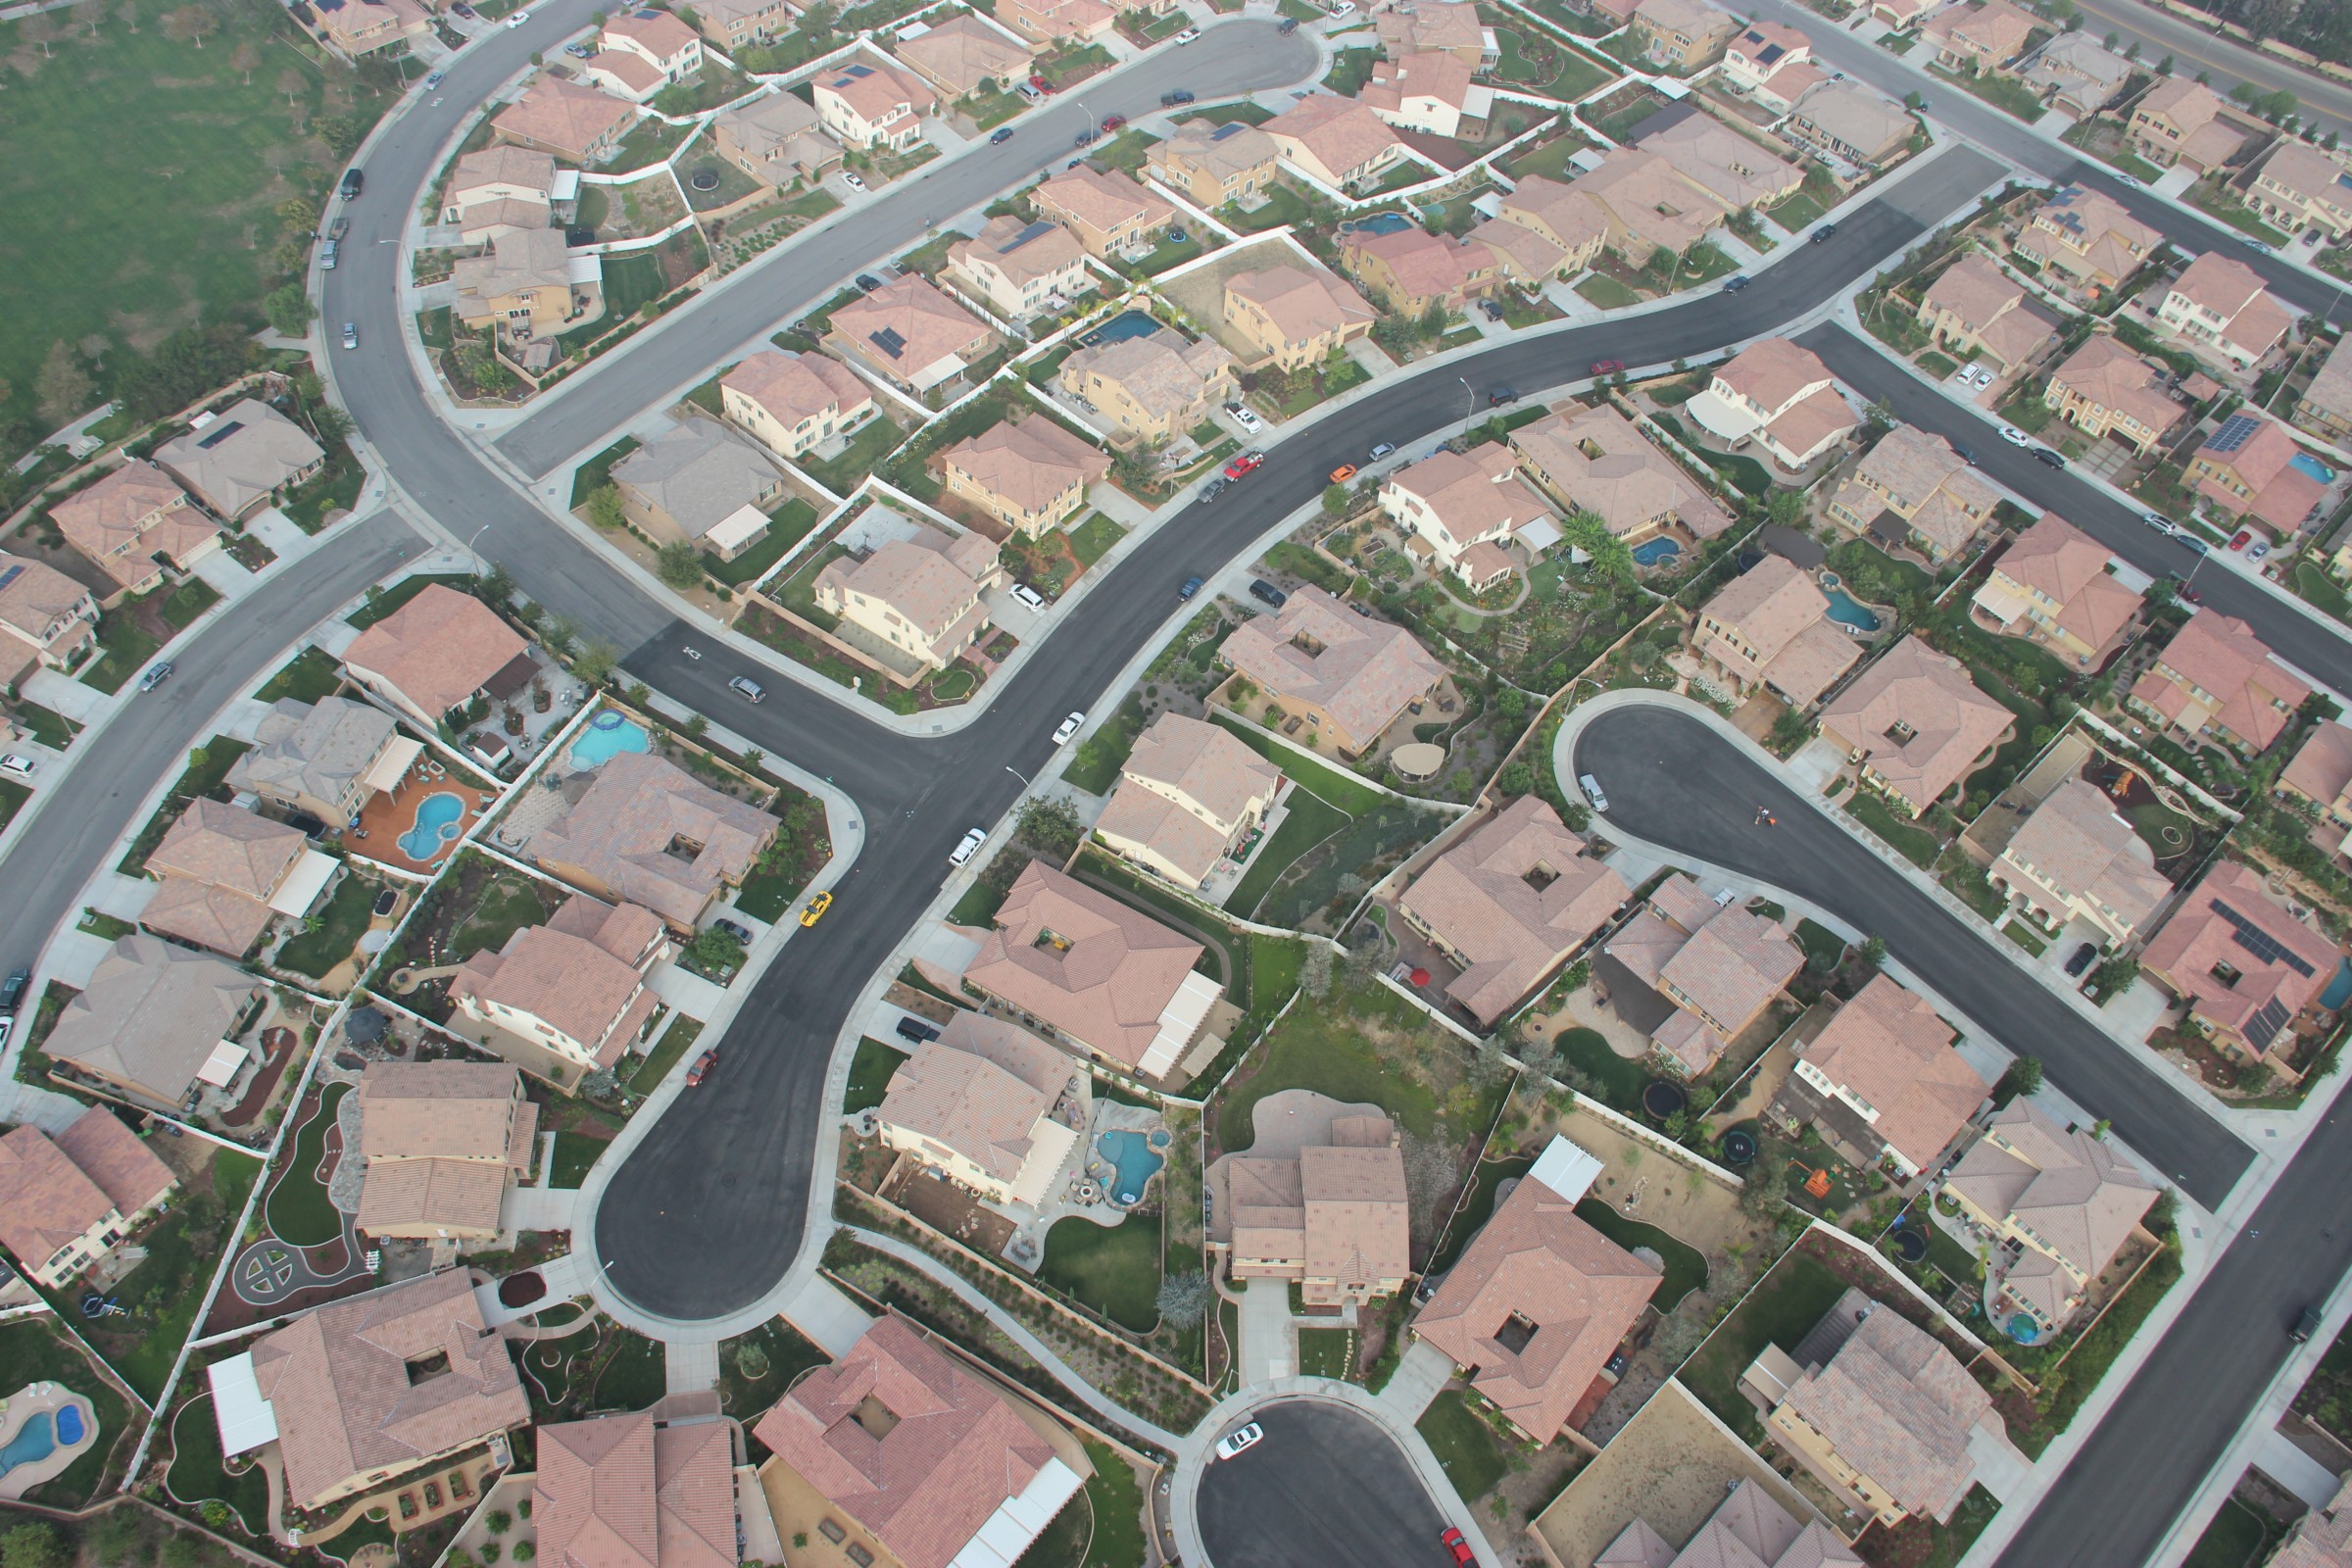 Free Stock Photo of Aerial View of Houses in Suburban Neighborhood